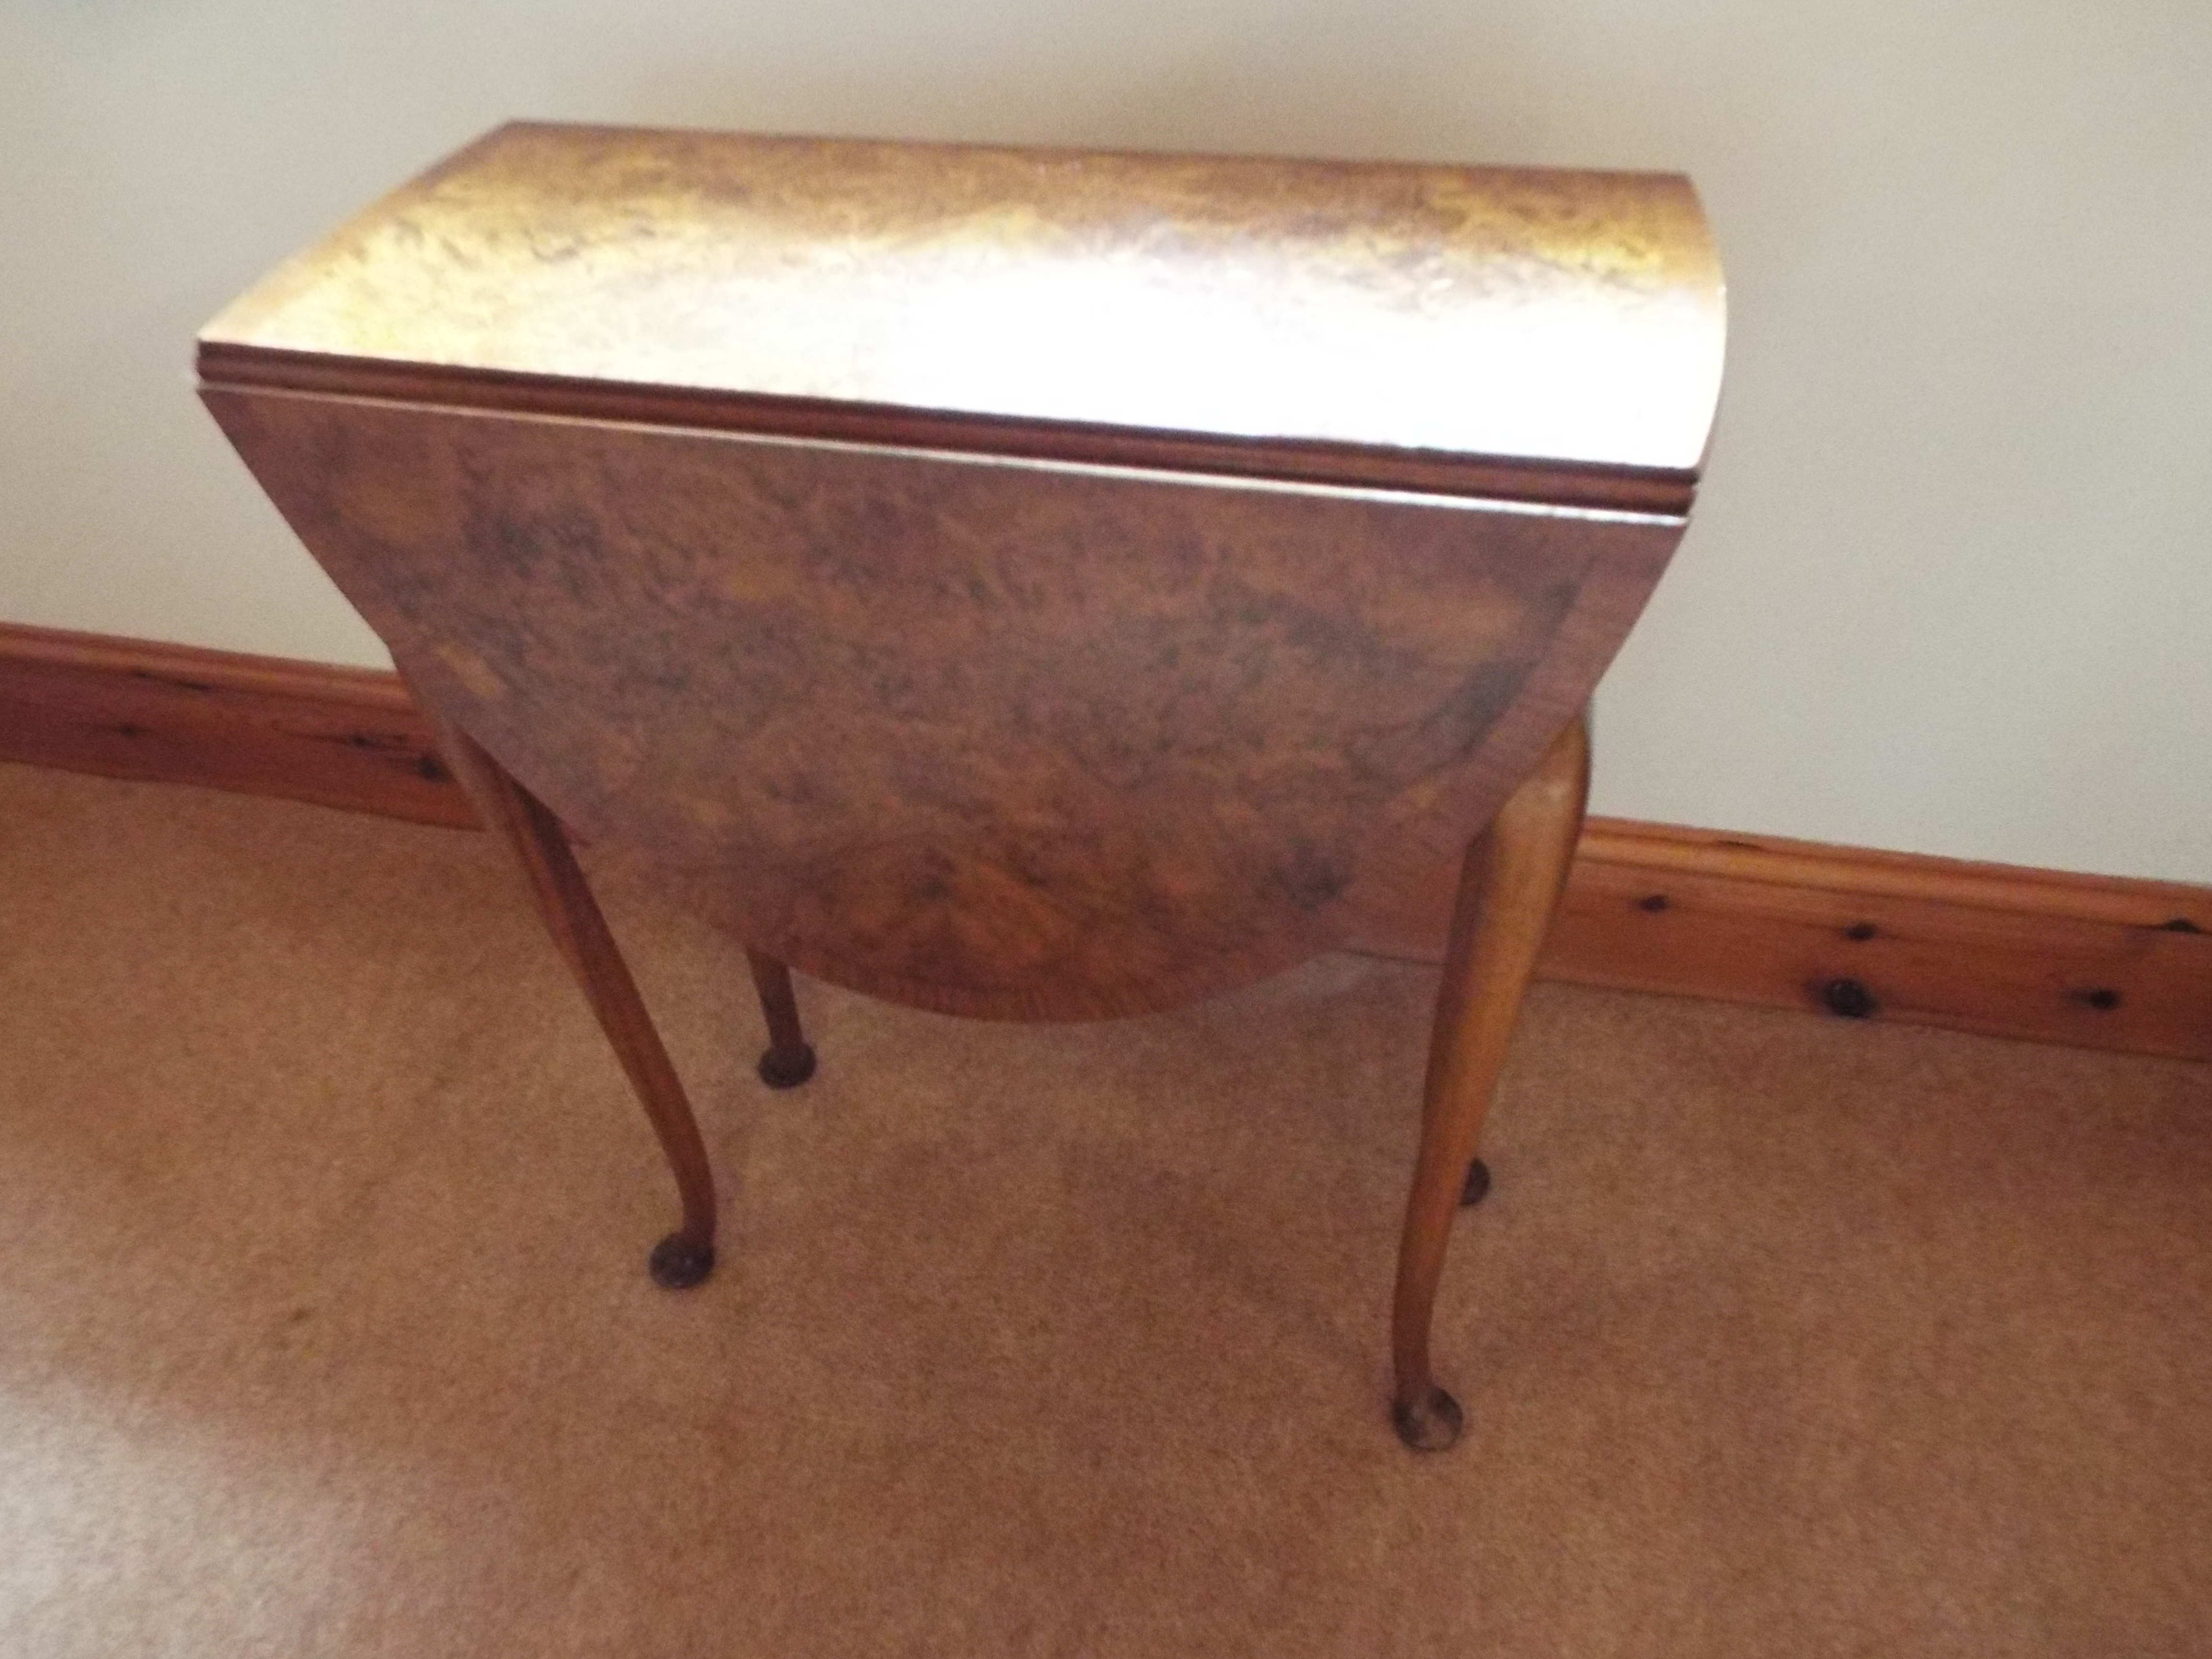 A small drop-leaf side table, 61 cm (h) x 76.